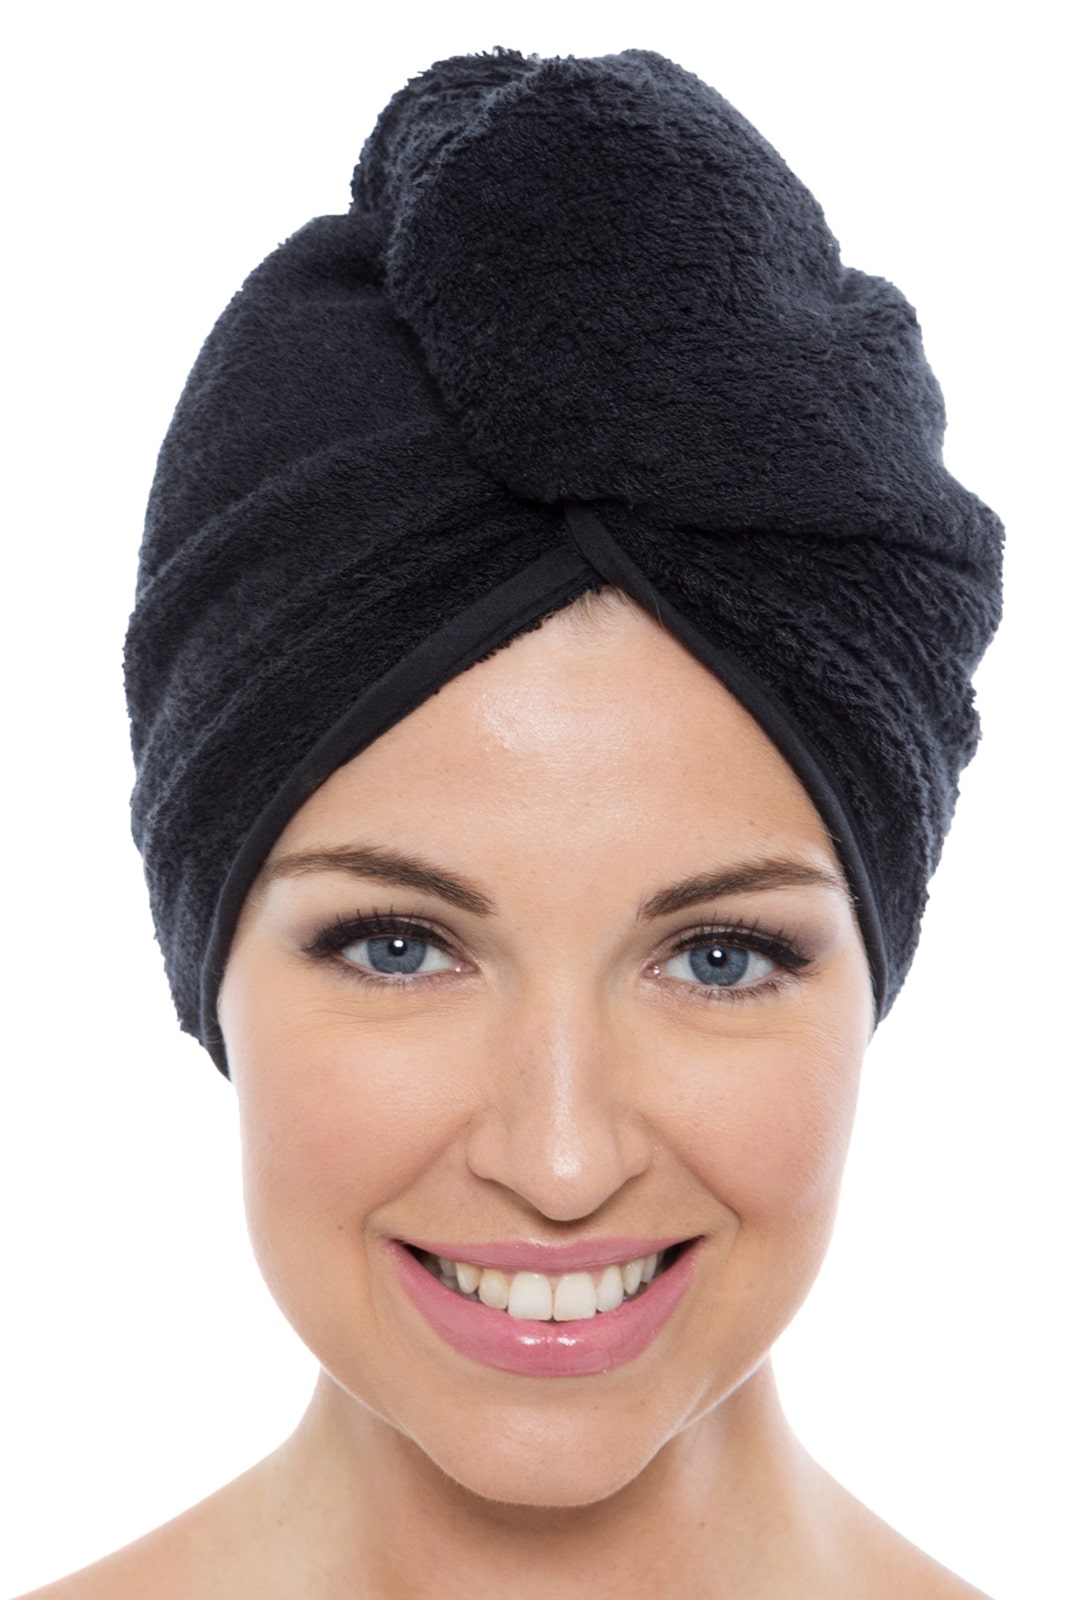 Texere Women's Terry Cloth Hair Towel / Wrap Womens>Spa>Hair Towel Fishers Finery Black 